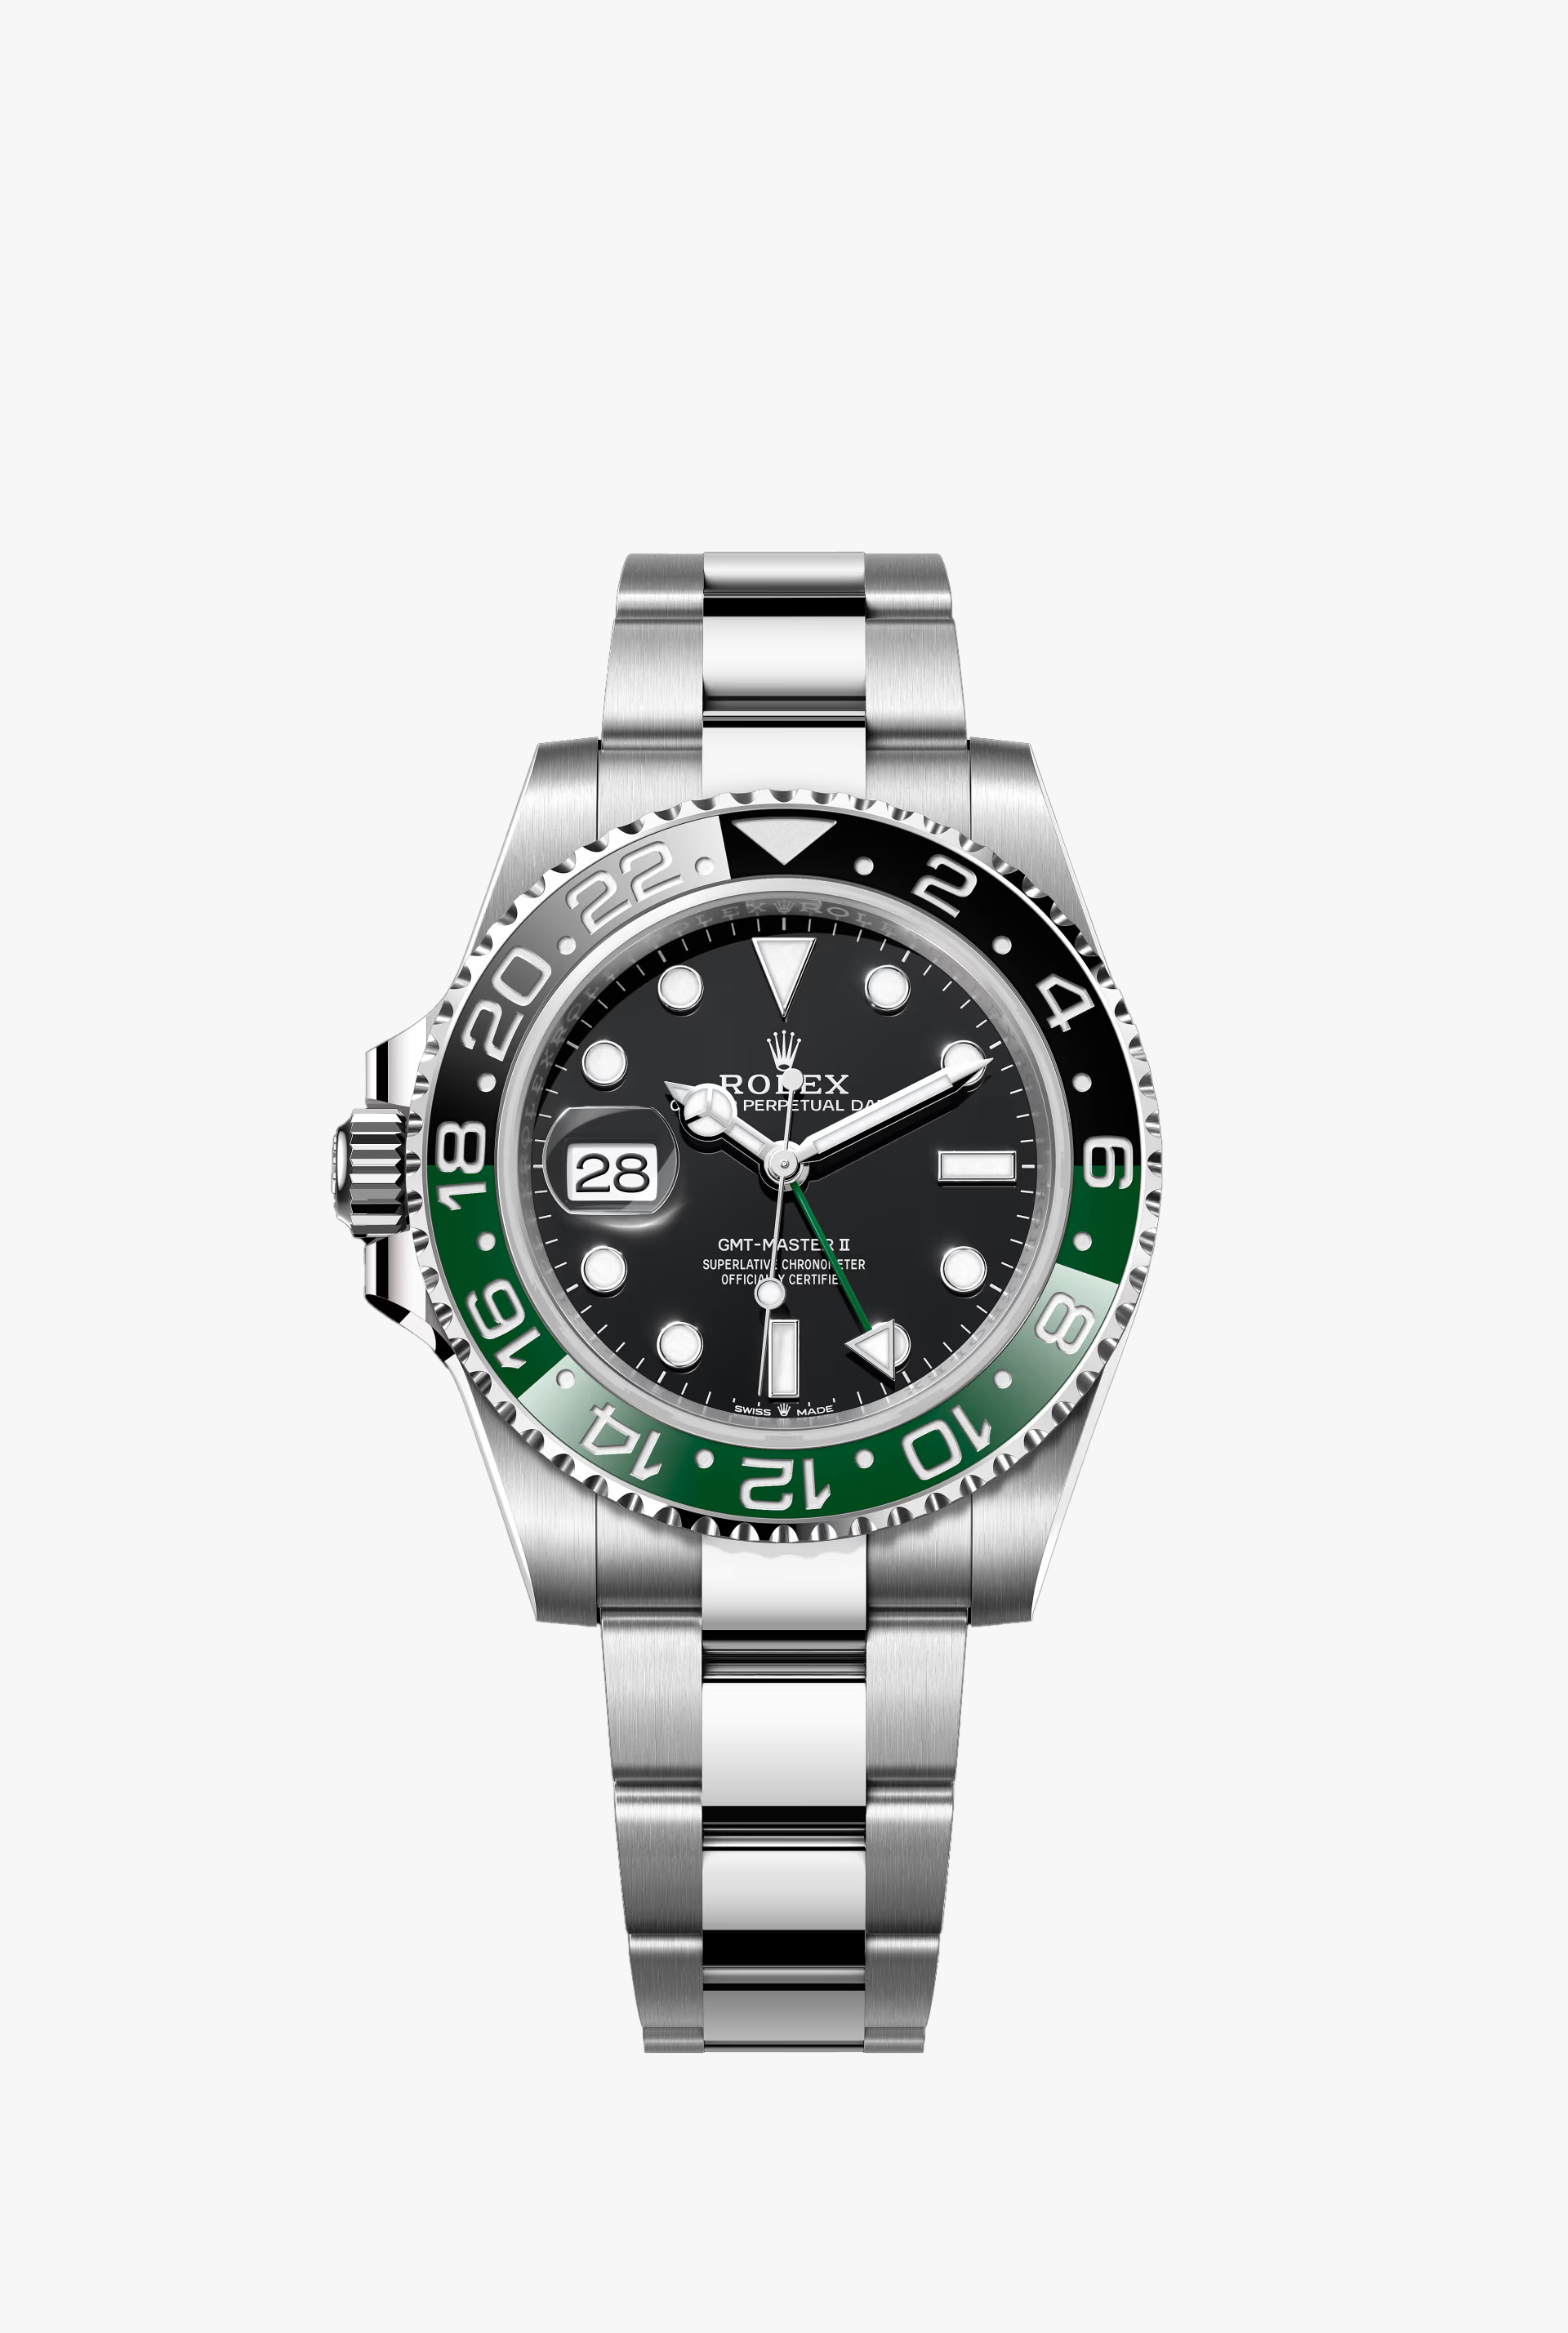 Rolex GMT-Masterl Oyster,40 mm, Oystersteel,Reference 126720VTNR